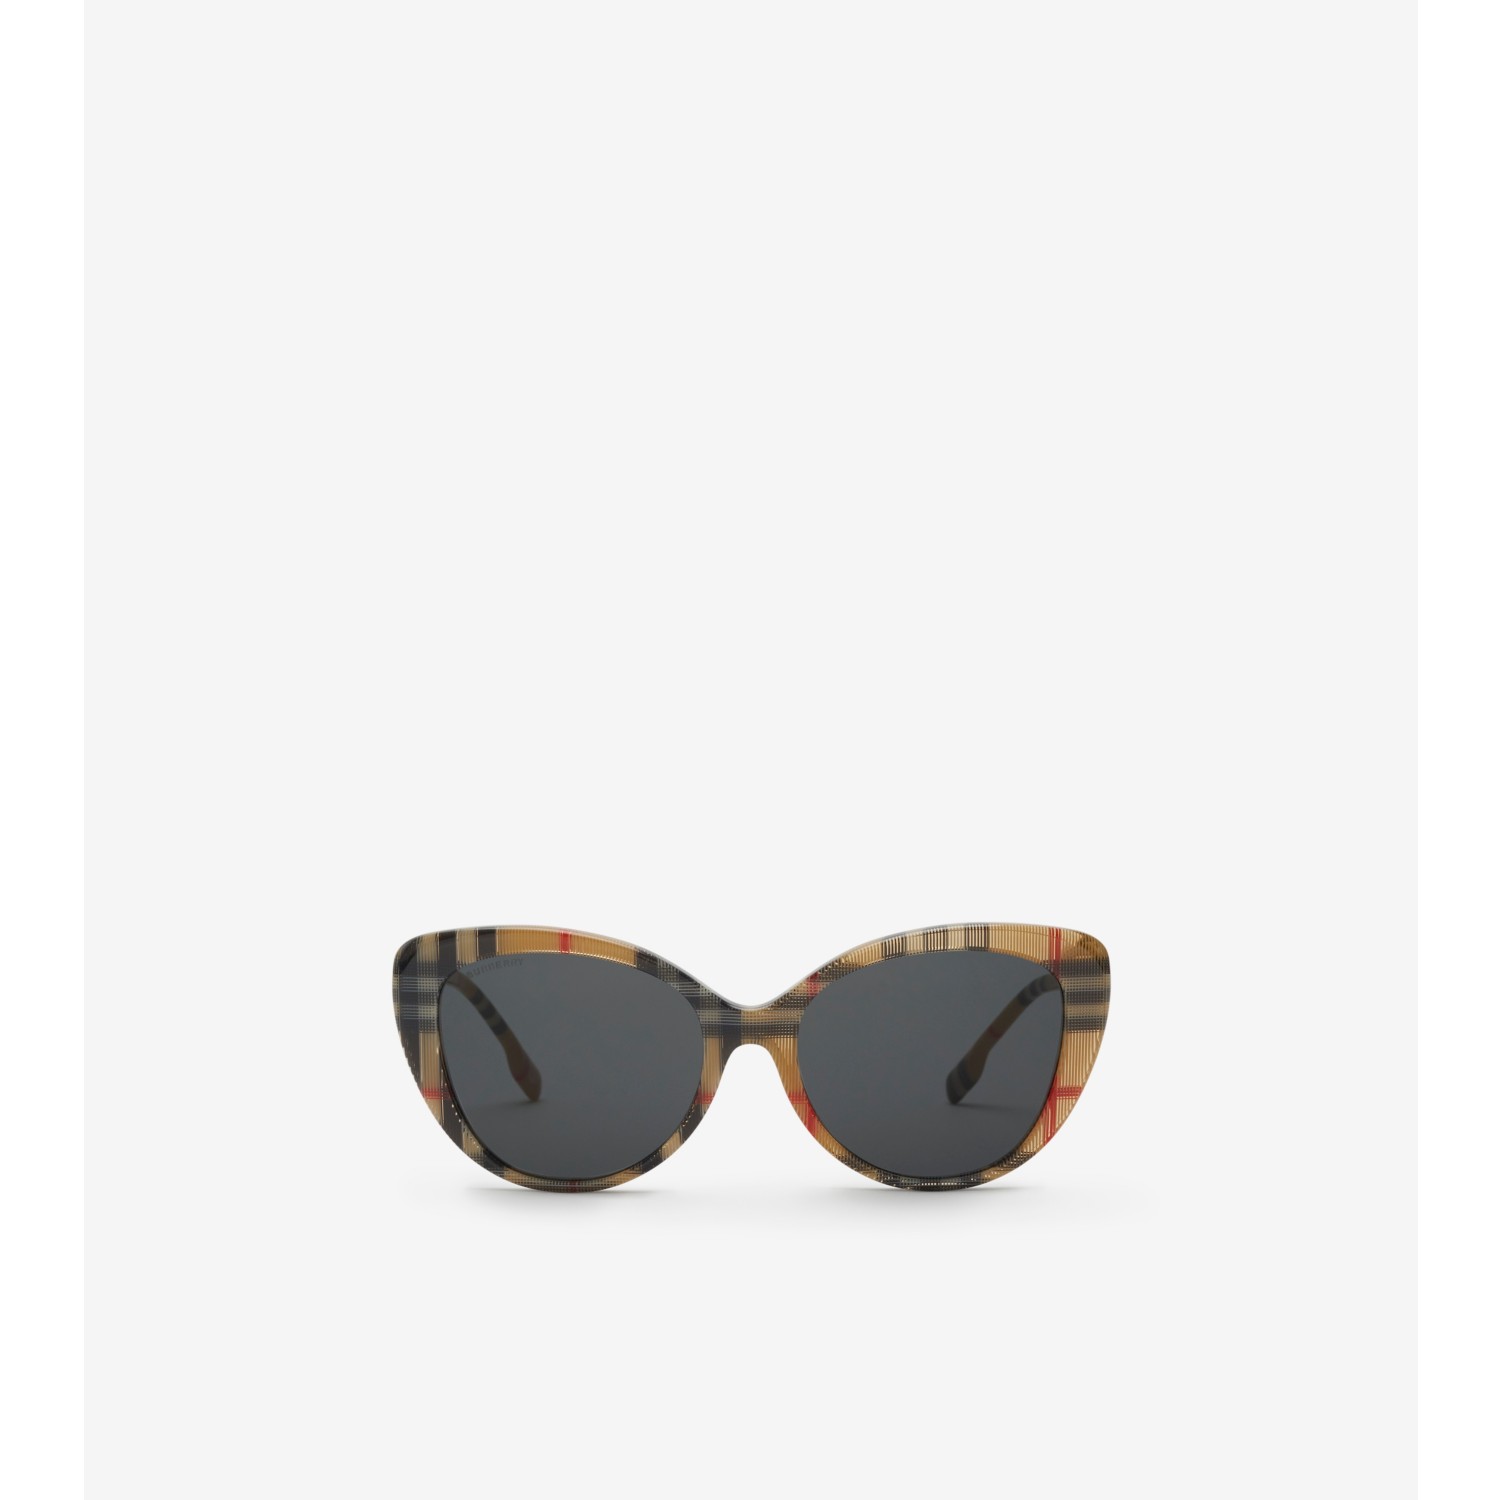 Oversize-Sonnenbrille in Check